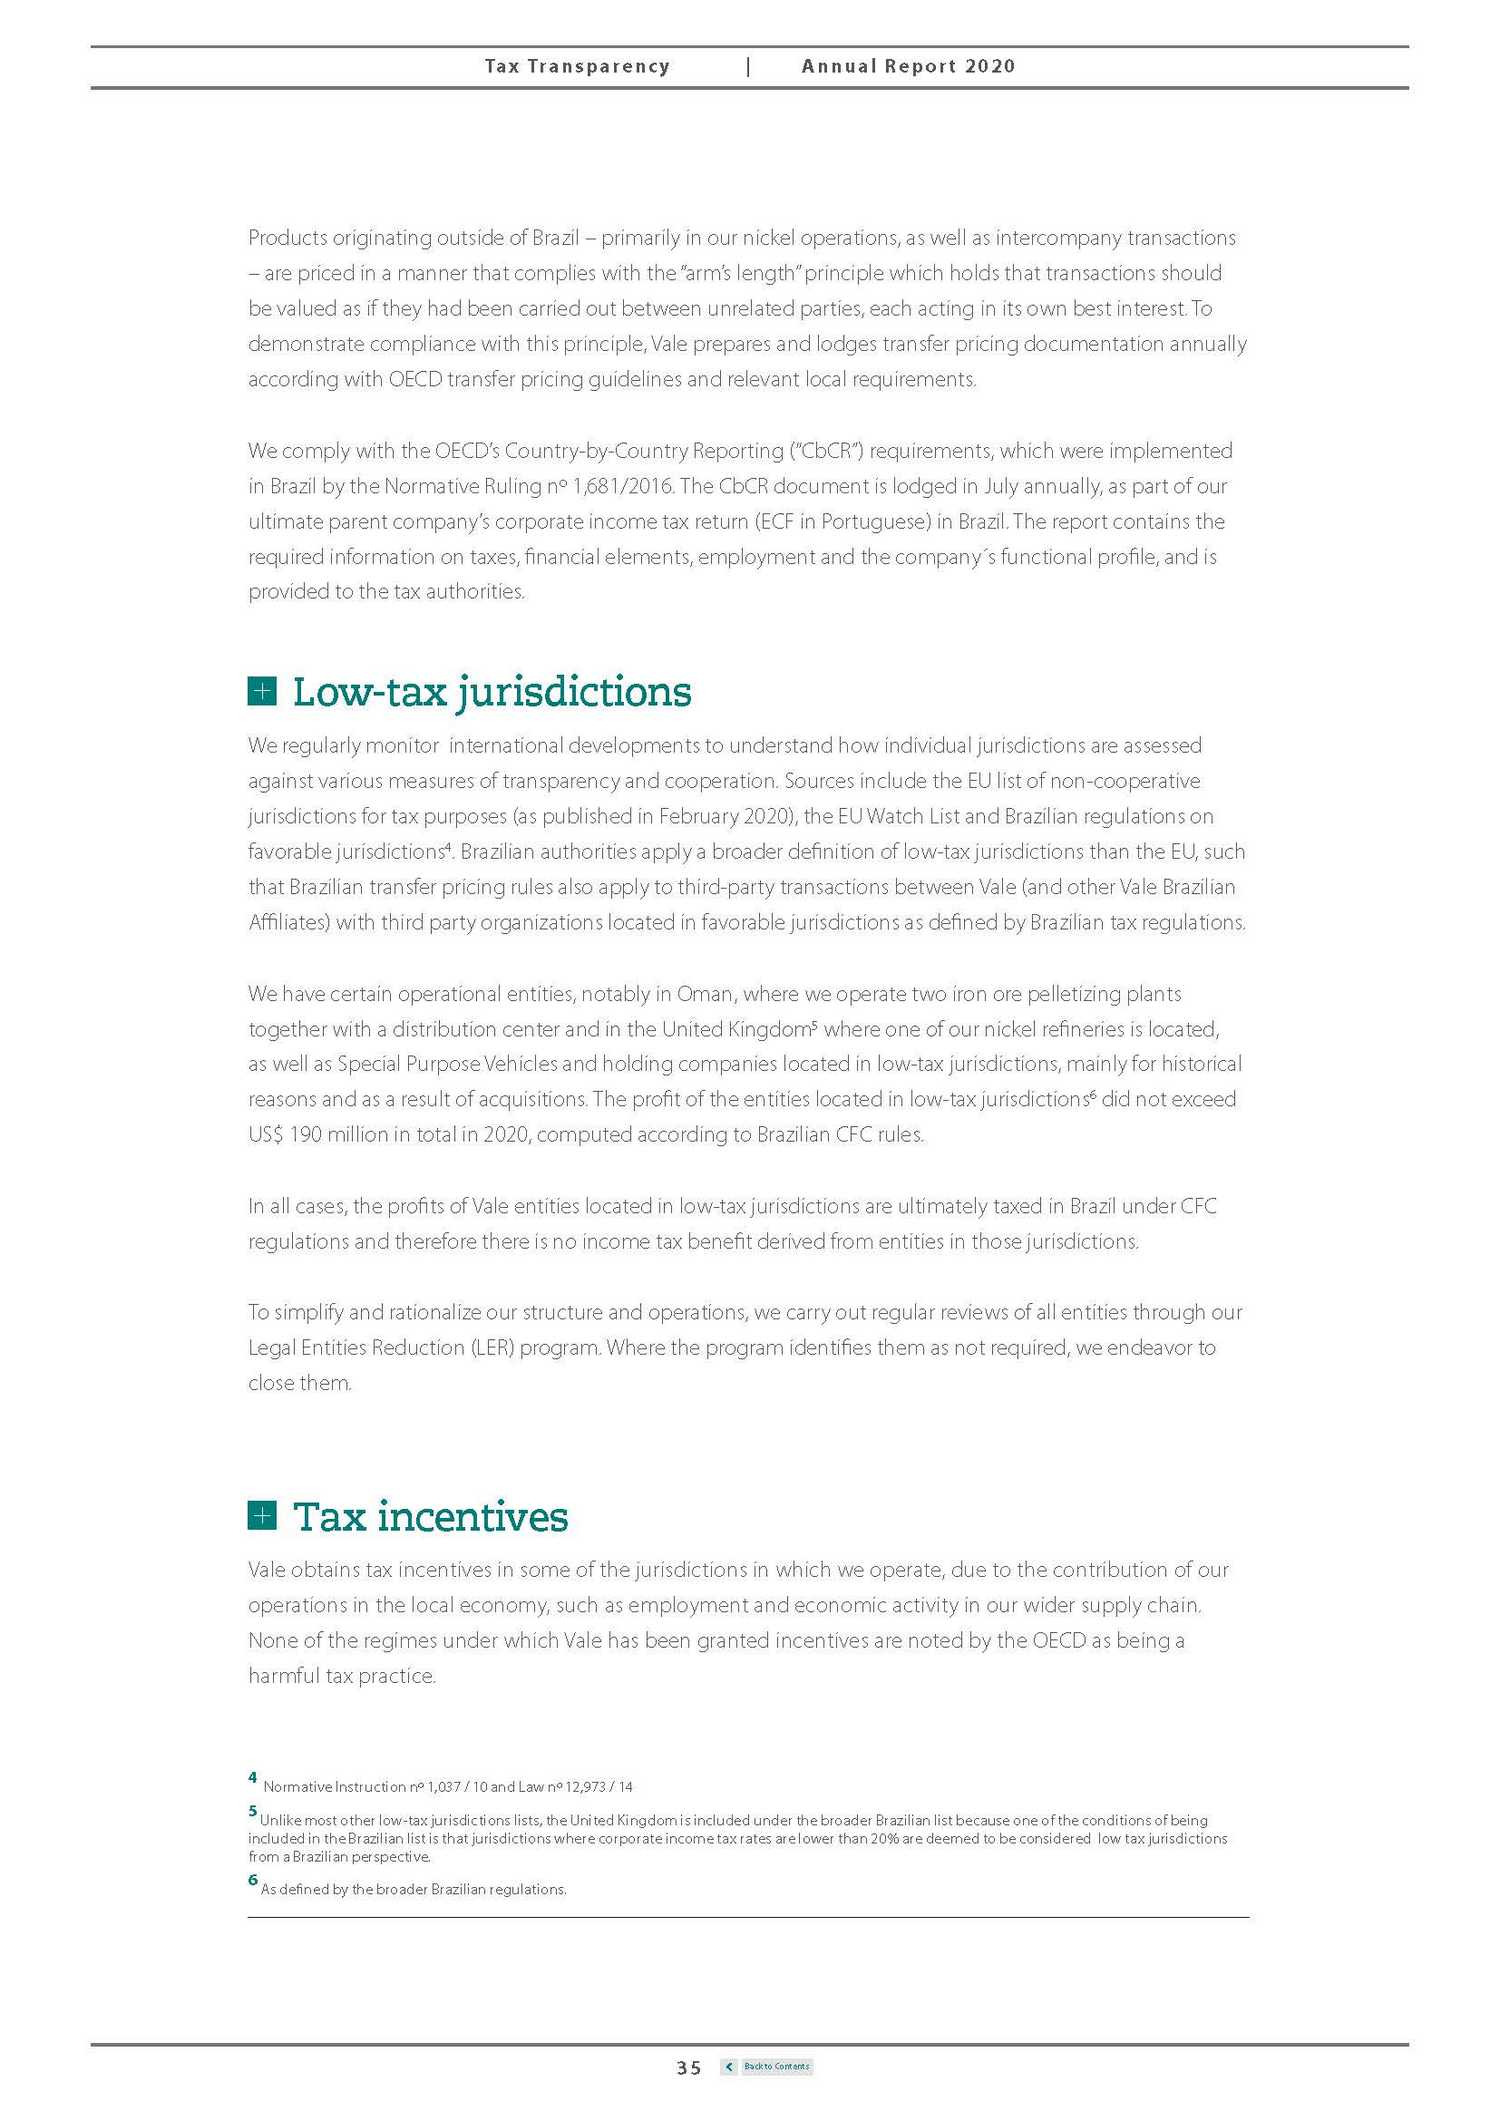 17996-1-mm_tax transparency report vale 2020_page_35.jpg